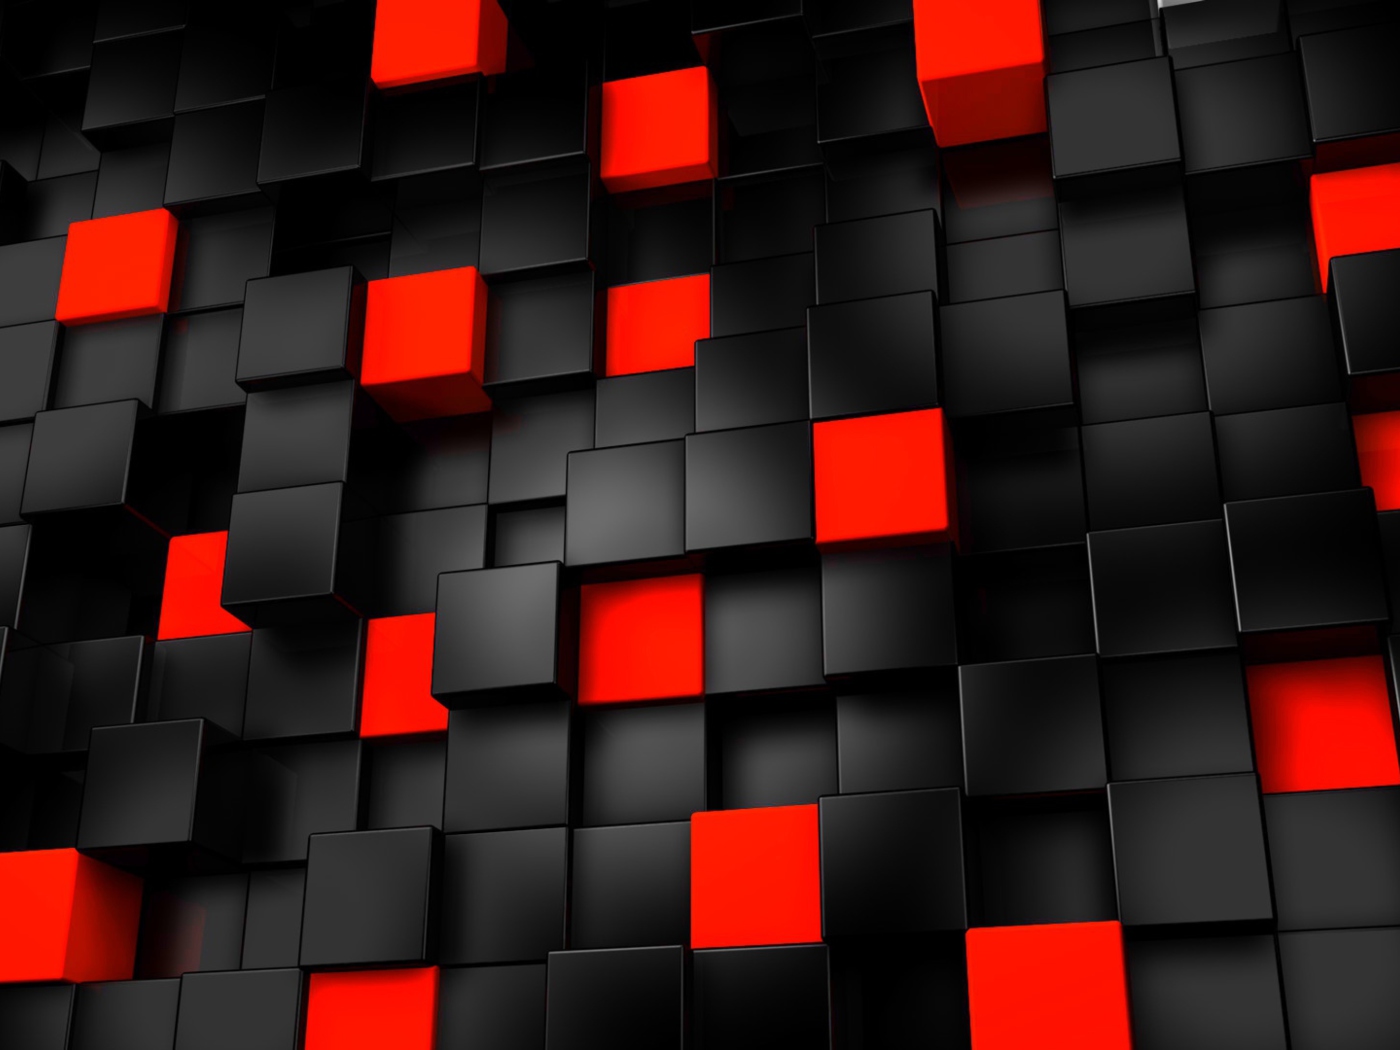 Abstract Black And Red Cubes wallpaper 1400x1050